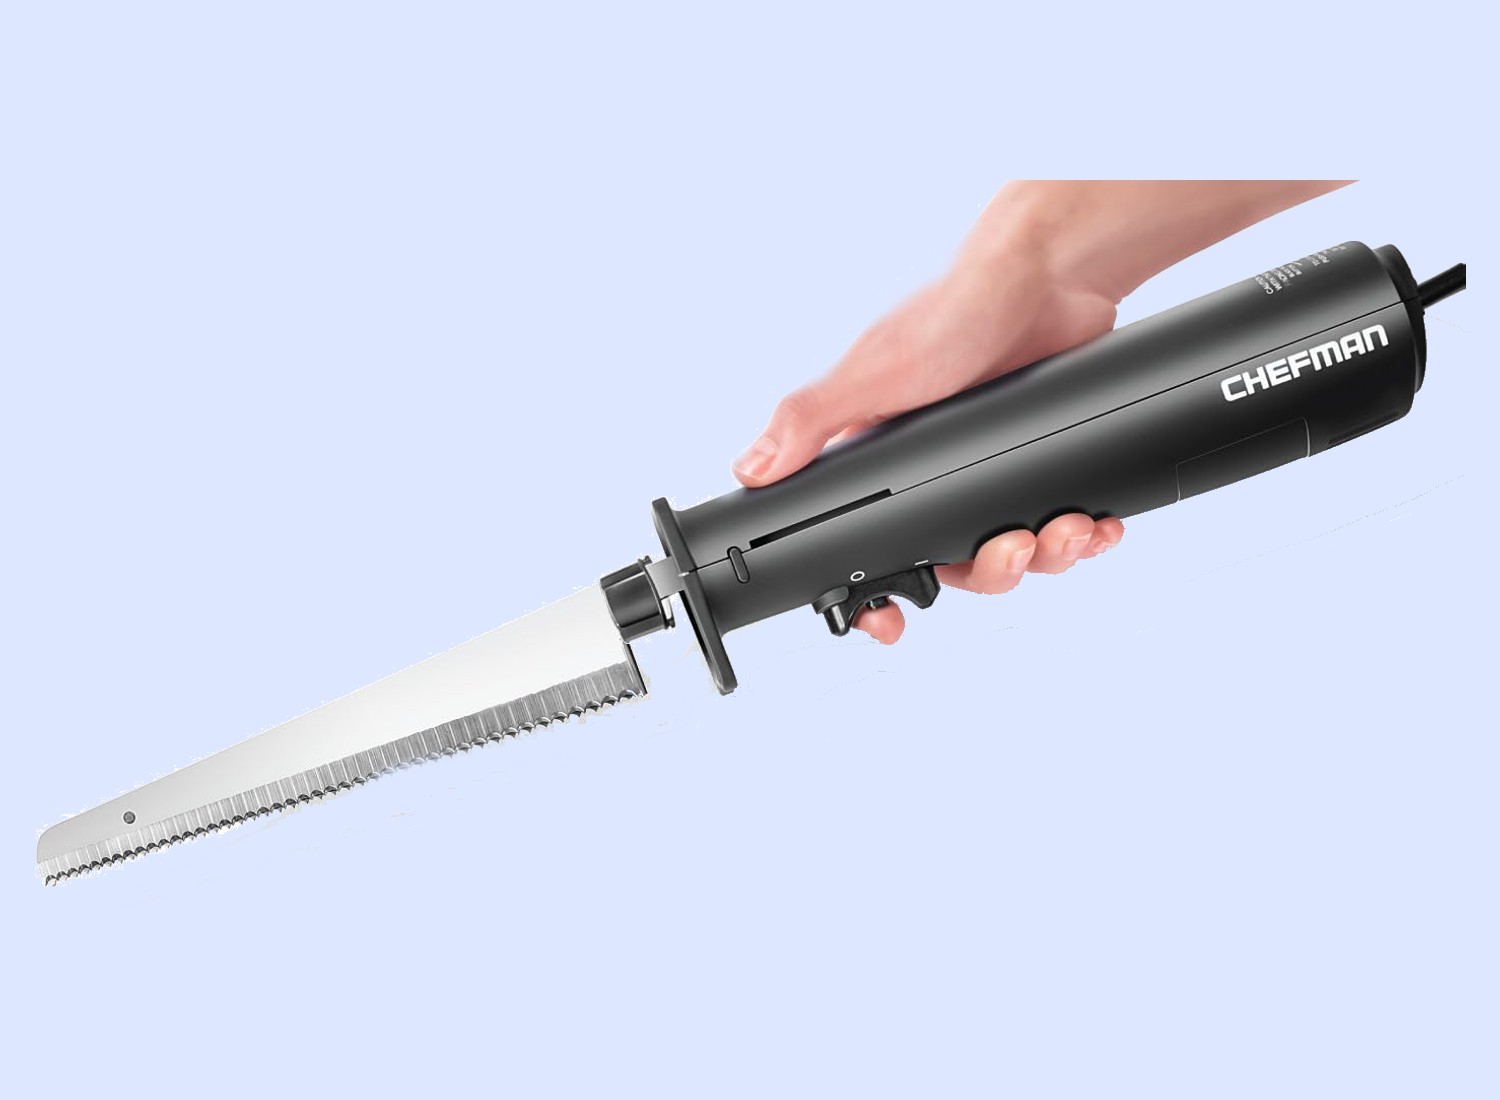 BEST Electric Carving Knife, BLACK+DECKER 9-Inch Electric Carving Knife,  Black, EK500B REVIEW 